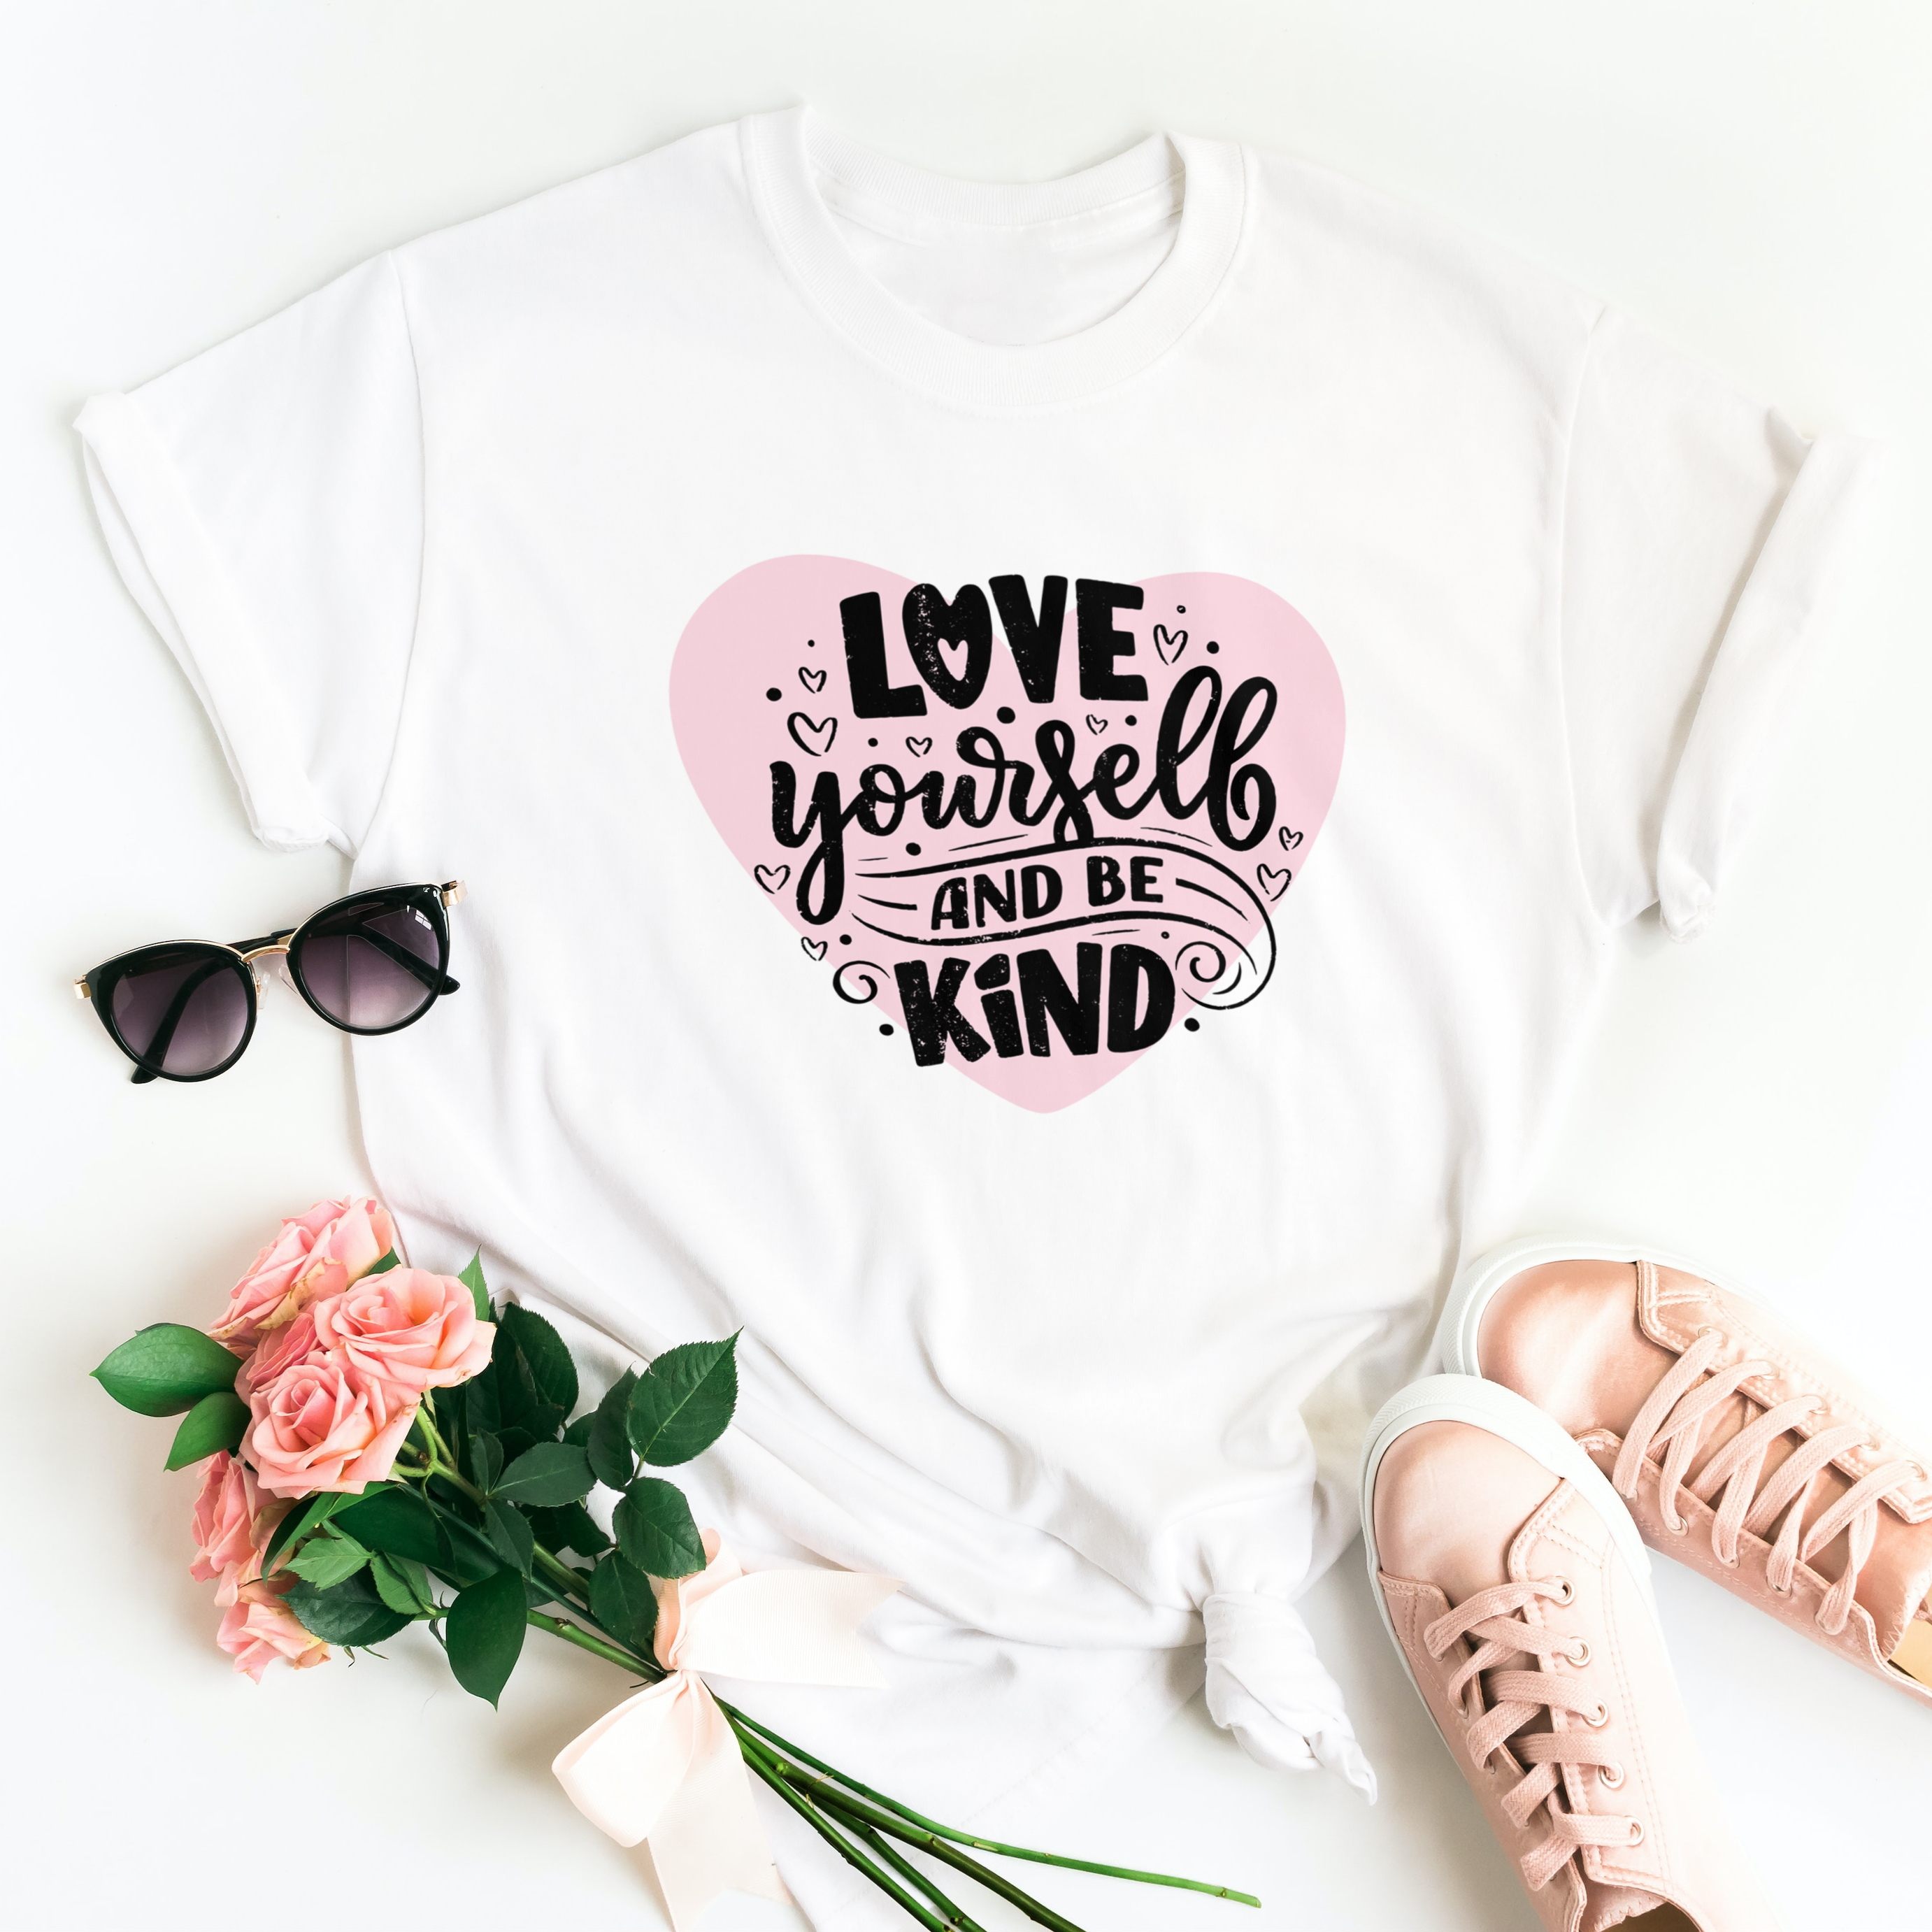 Story of Awakening Lifestyle Community Spirituality Relationships Love Light Meditation Oneness Earth Balance Healing Shop Store Charity Tree Nature Read Write T shirt Tops Tees Clothing Women Horoscope Love Yourself Be Kind Sustainable Organic Cotton